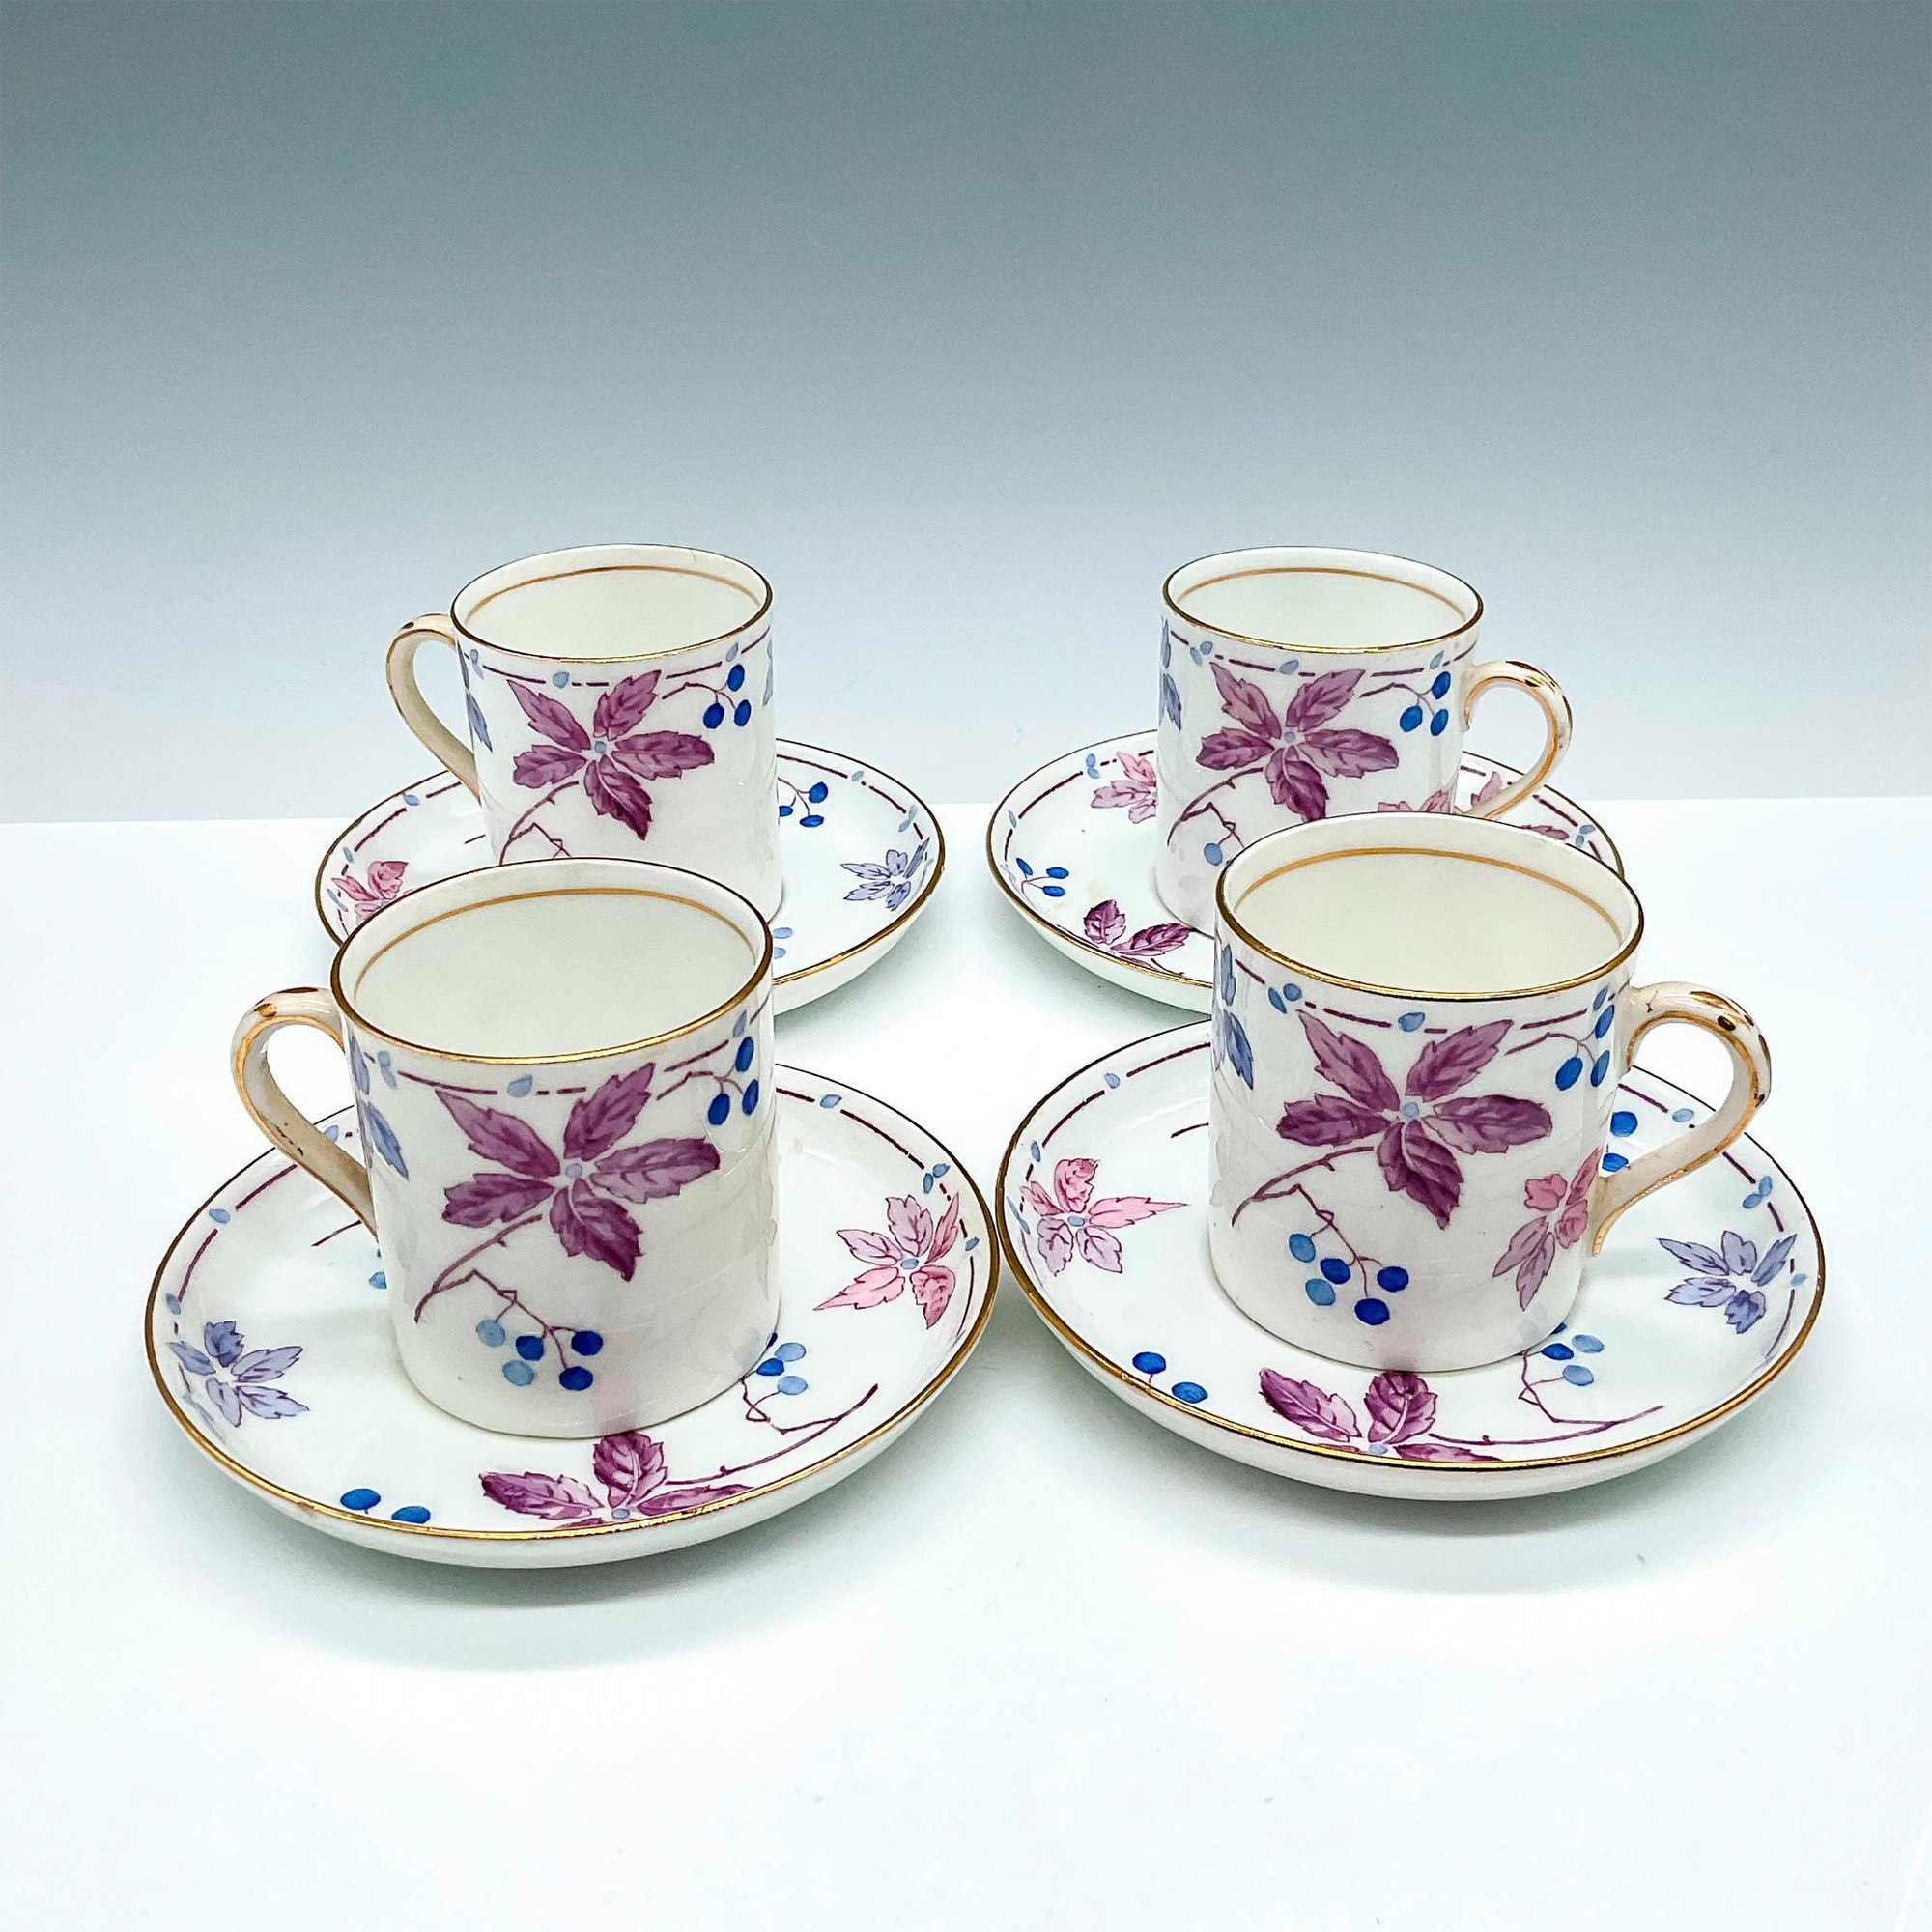 8pc Foley China Demitasse Cups and Saucers - Image 2 of 3